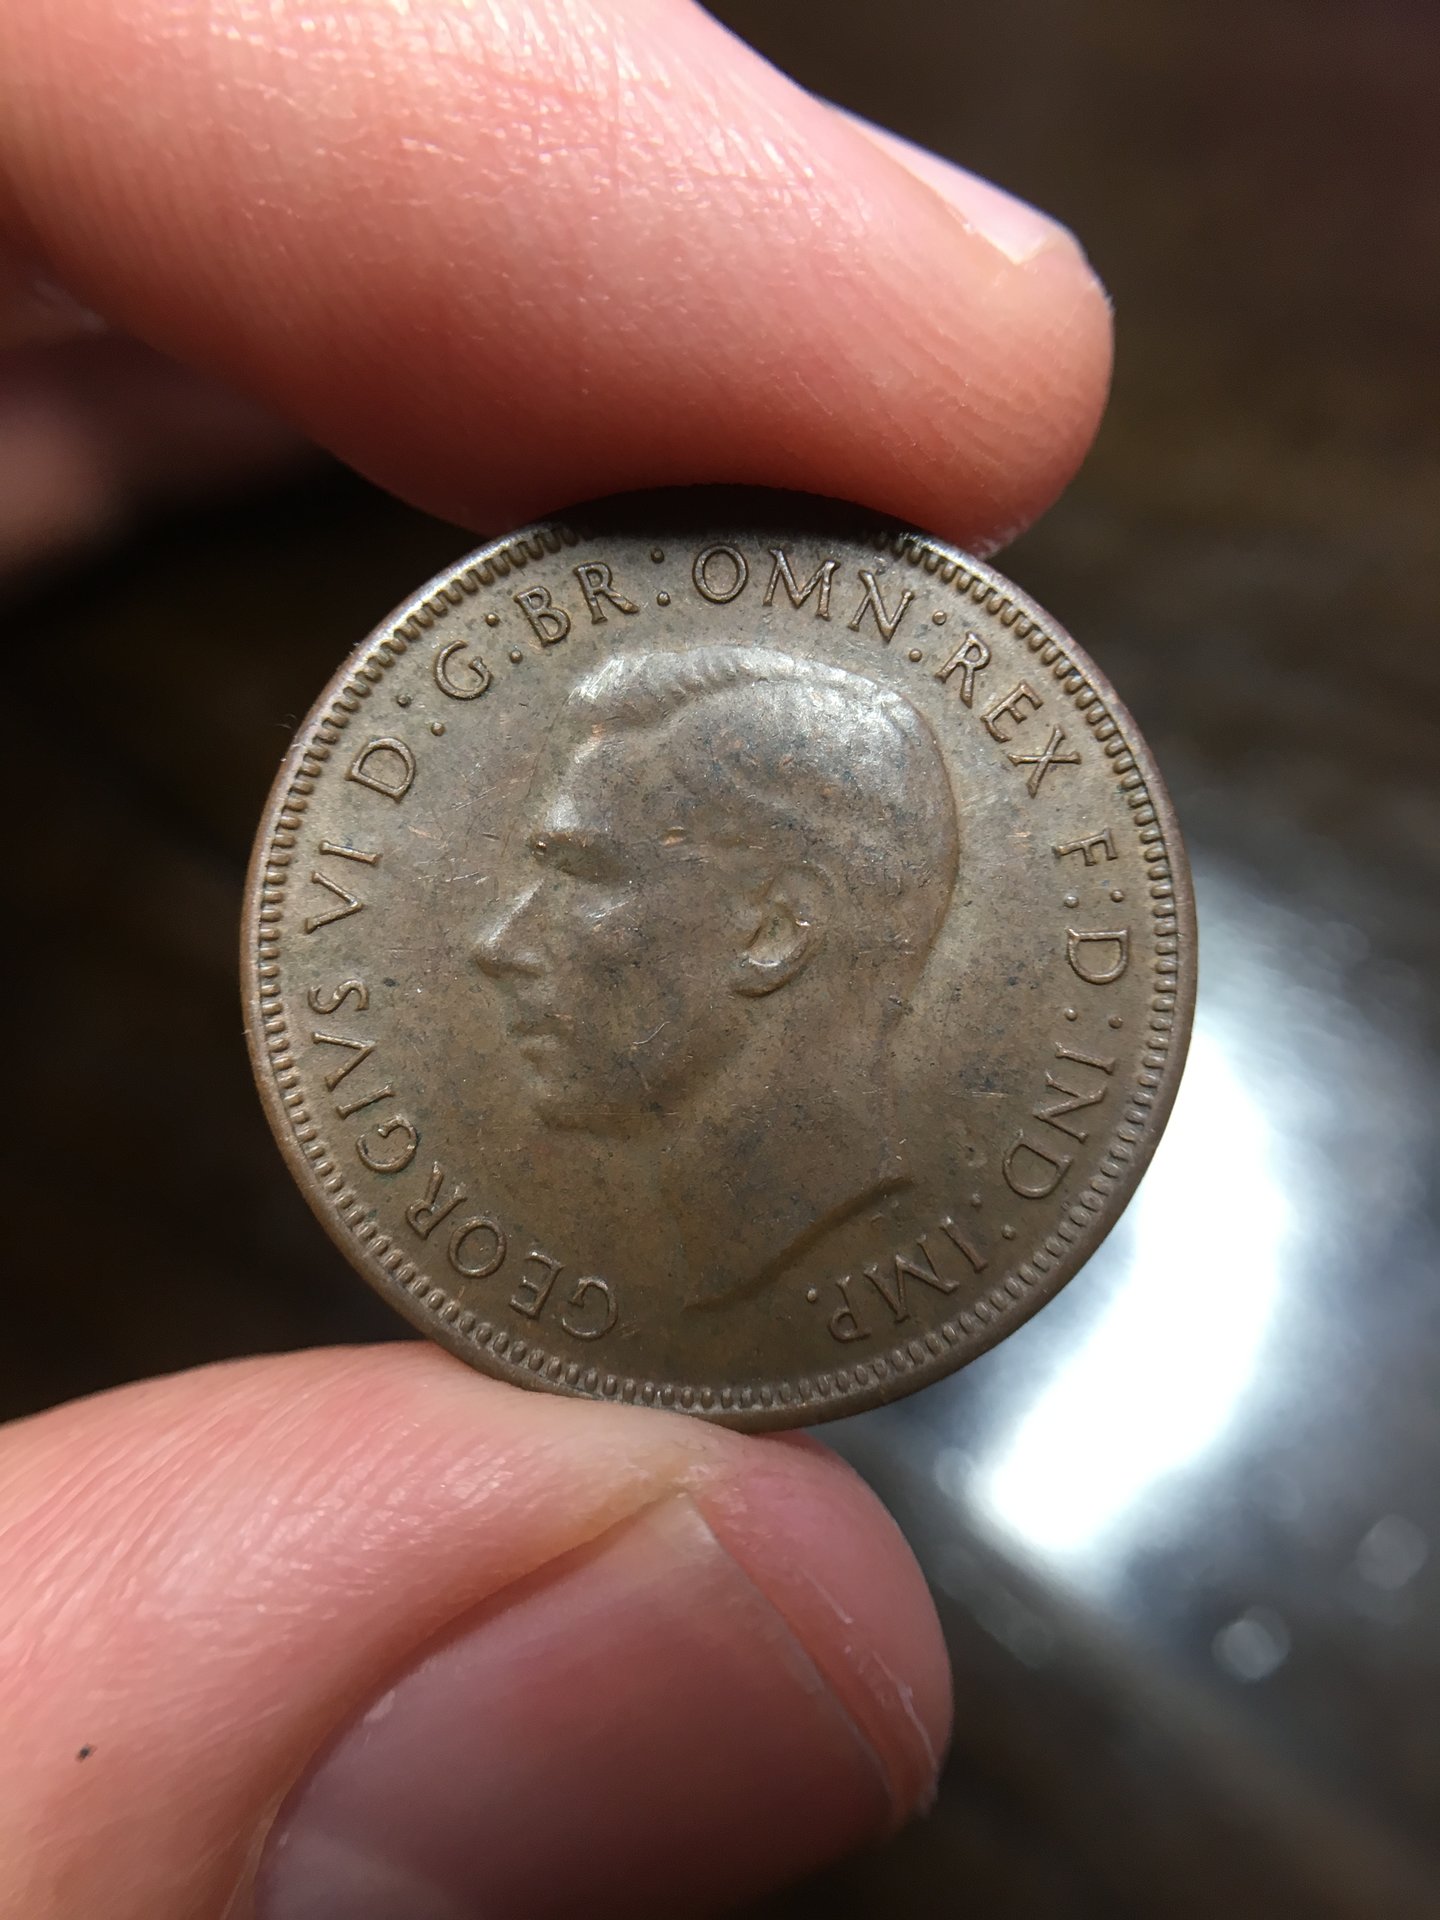 Is this typical of 1945 Australia half penny? Weak image? | Coin Talk